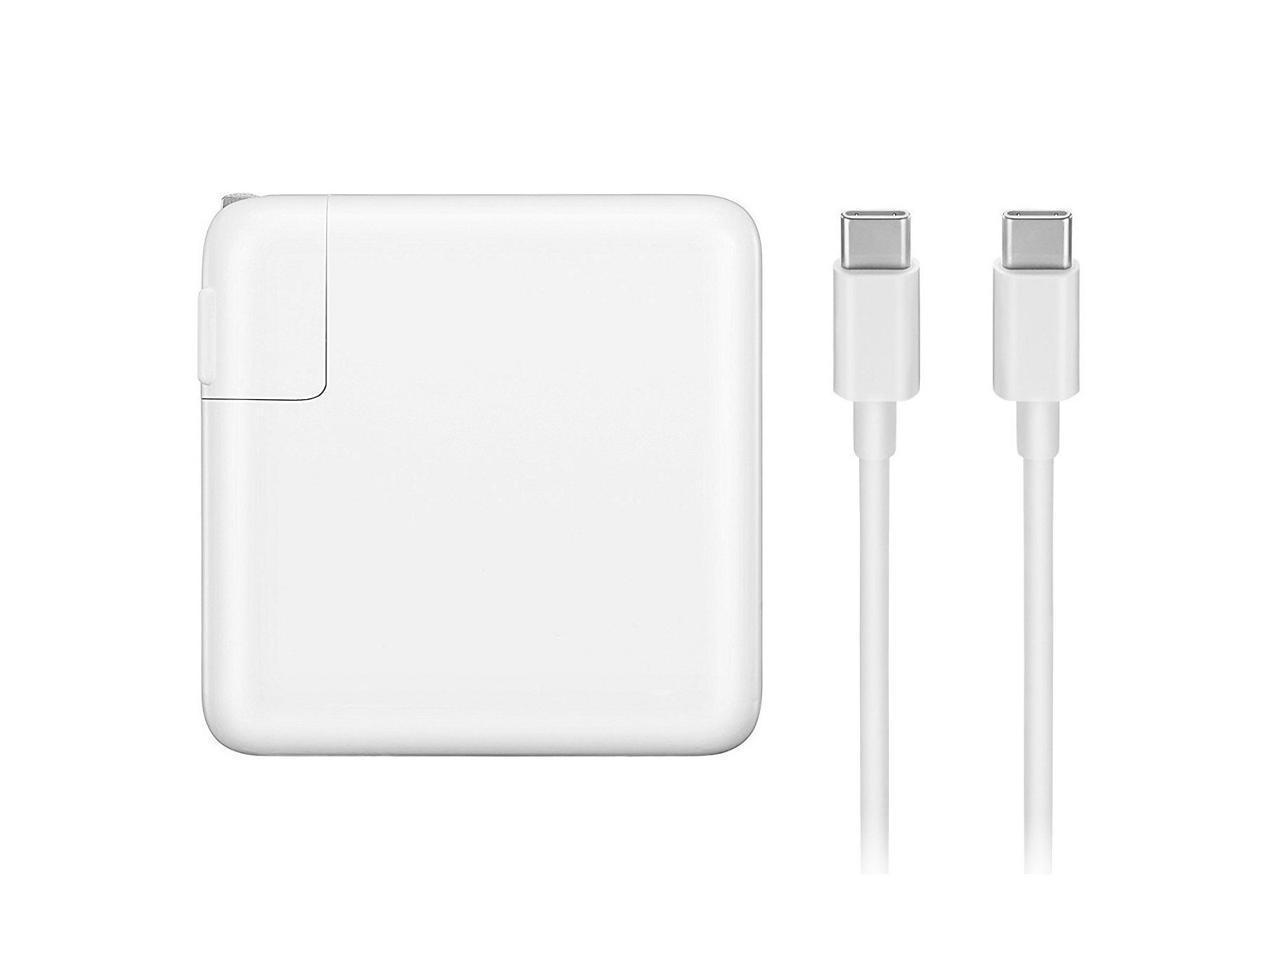 HF-30WUC: 30W USB C Power Adapter, Compatible with MacBook, MacBook Air Charger iPad Pro, Pixel, Galaxy, Works with PD 30W 29W 20W, Included USB-C to USB-C Charge Cable 2meter